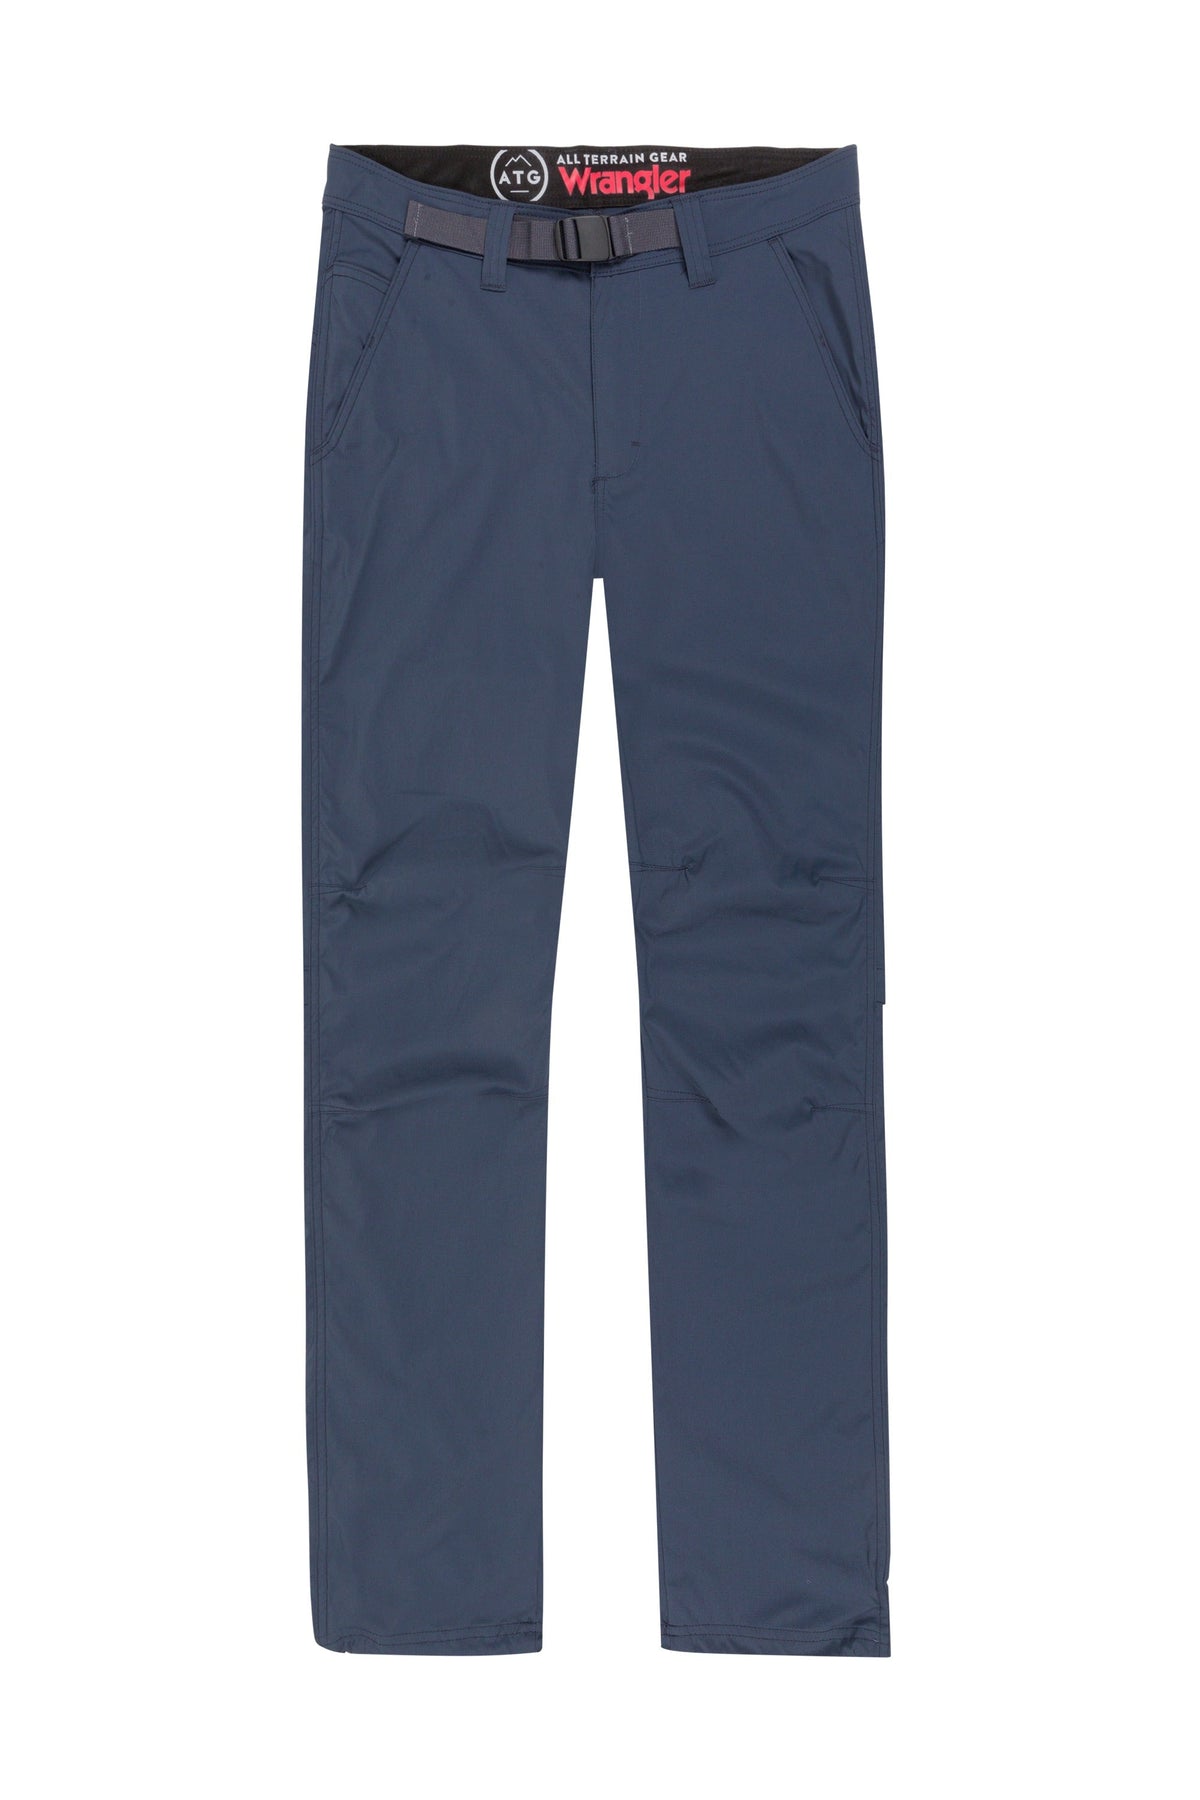 Convertible Trail Jogger in Blue Nights